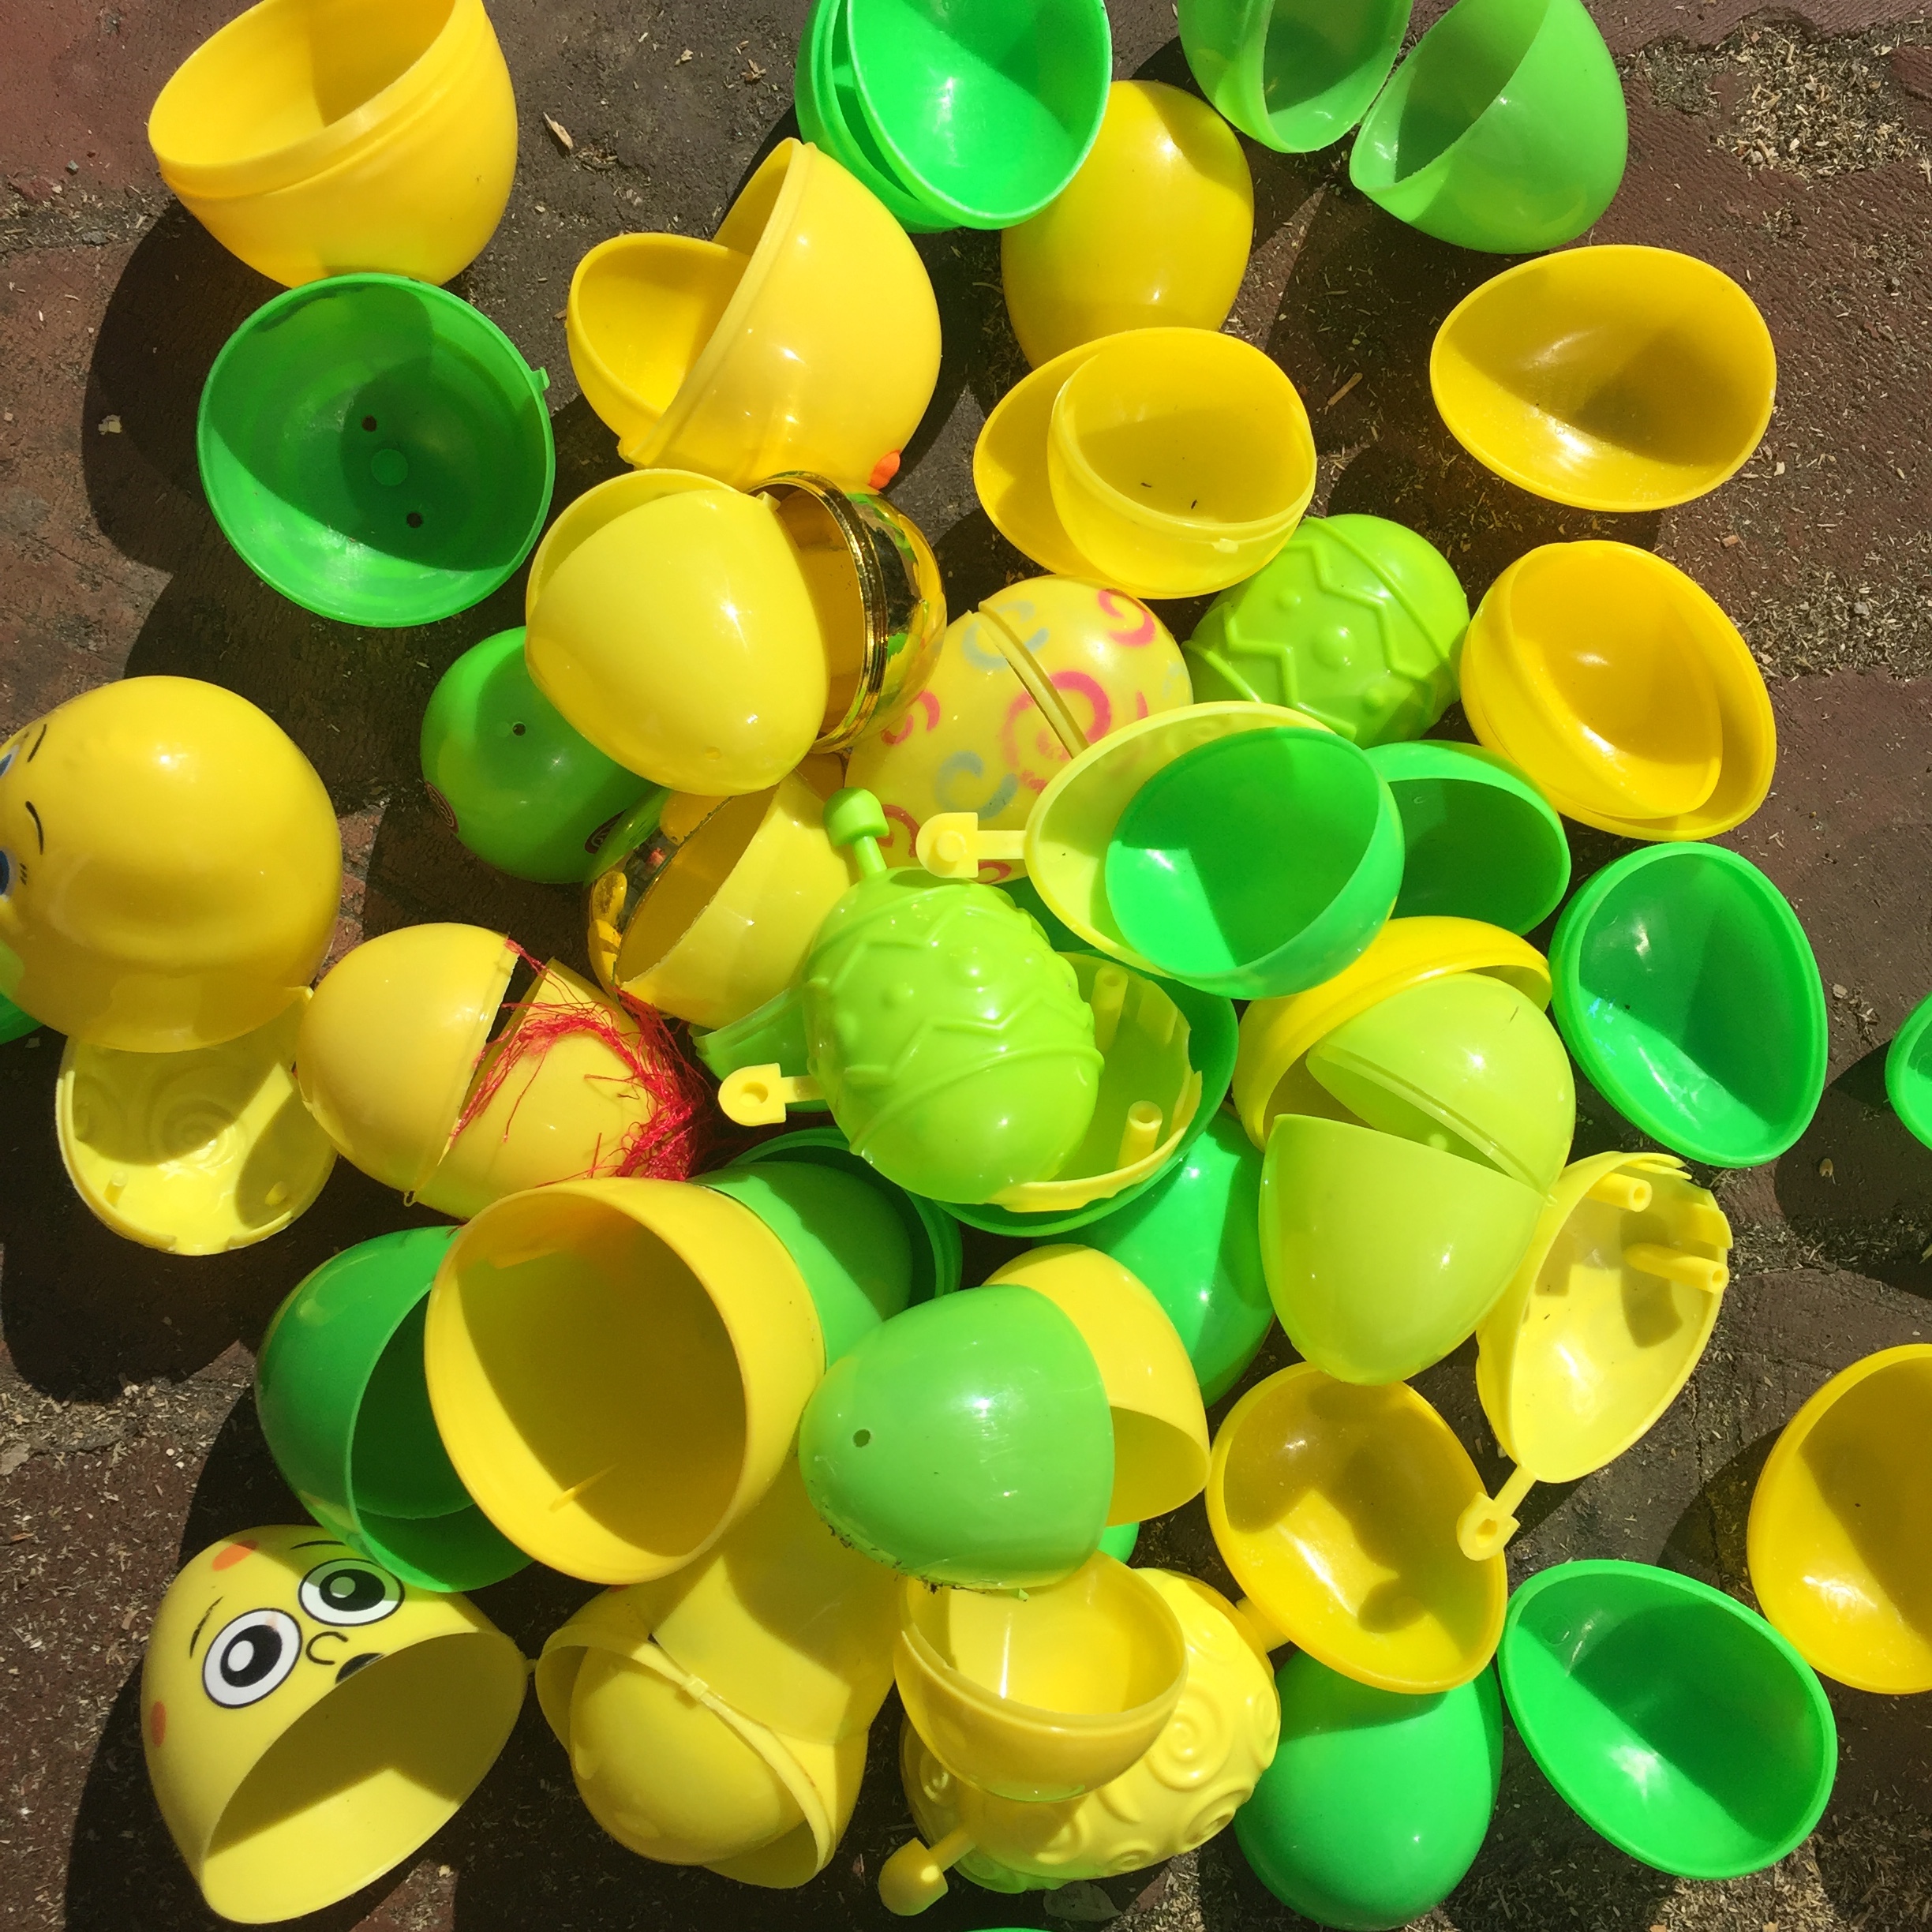 Green and yellow Easter eggs emptied on ground in pile